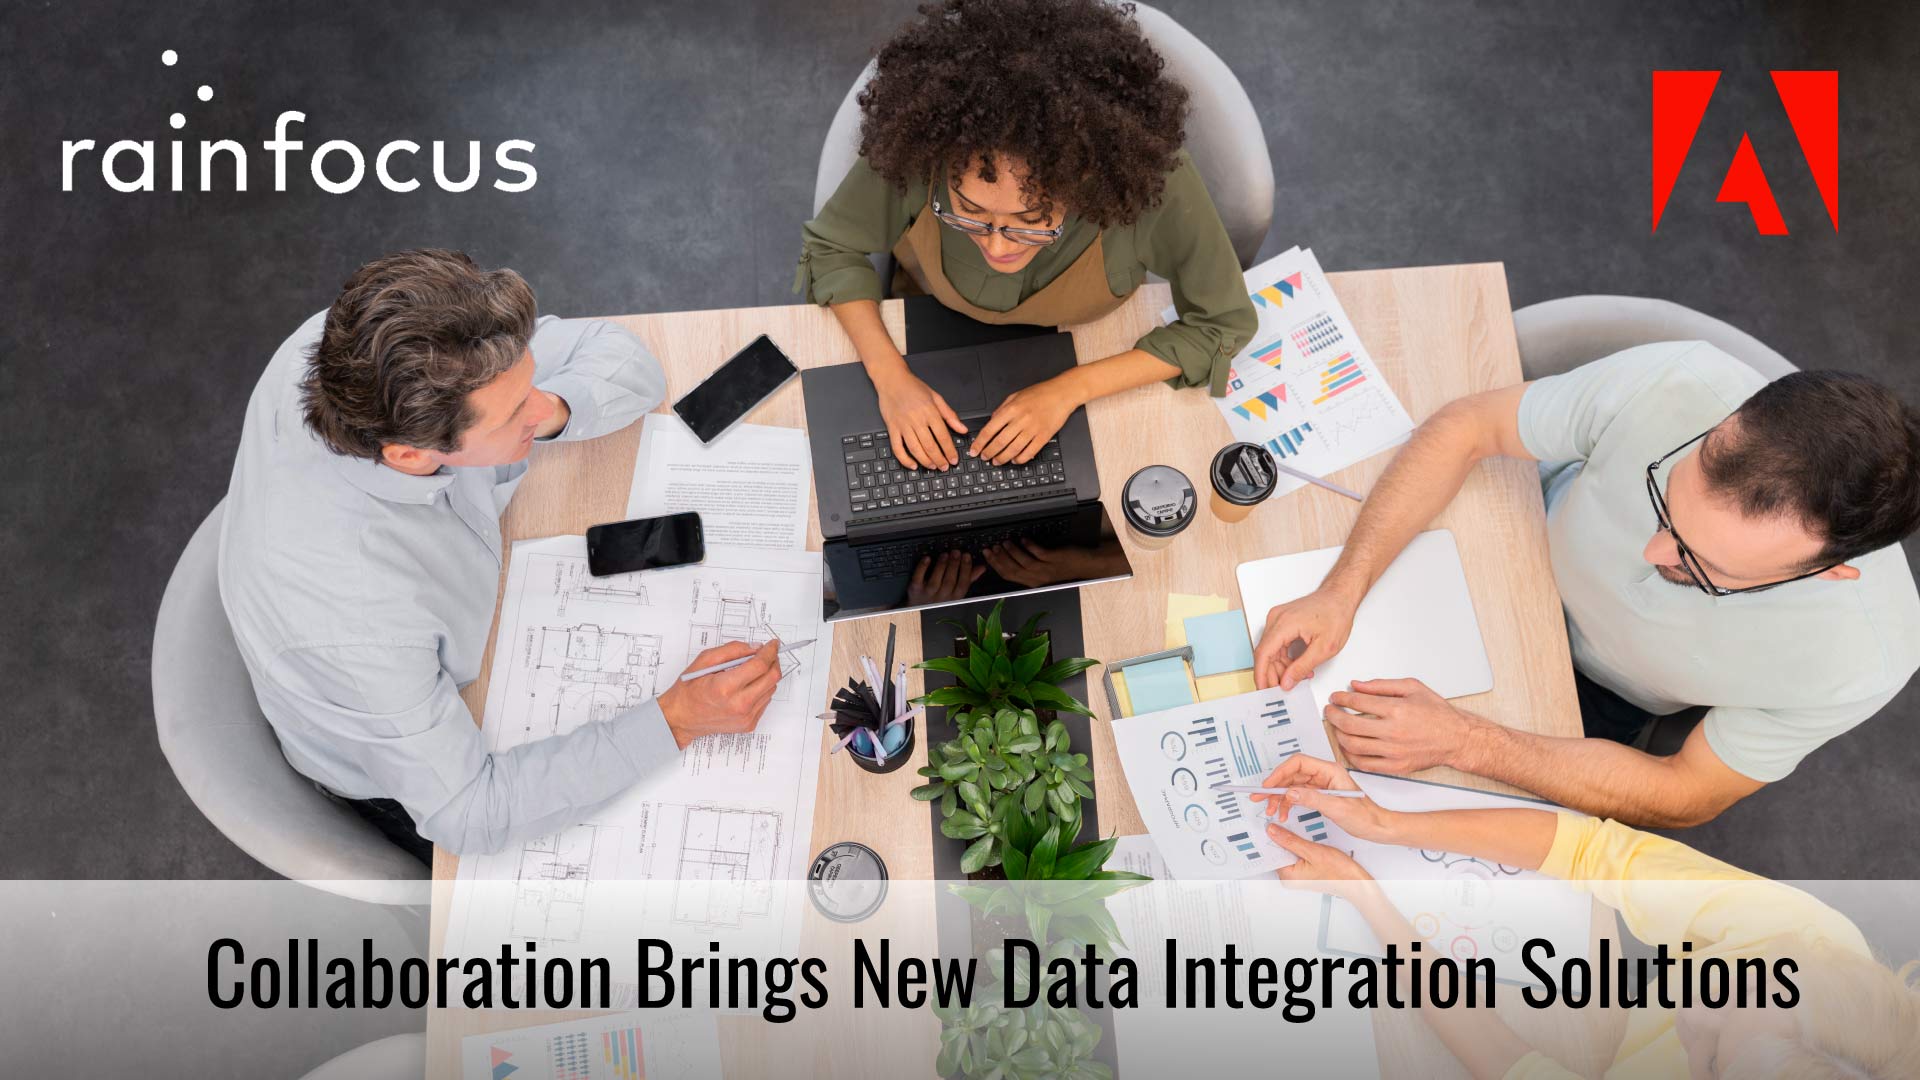 RainFocus Unveils New Data Integration Solutions with Adobe to Fuel Personalized Journeys